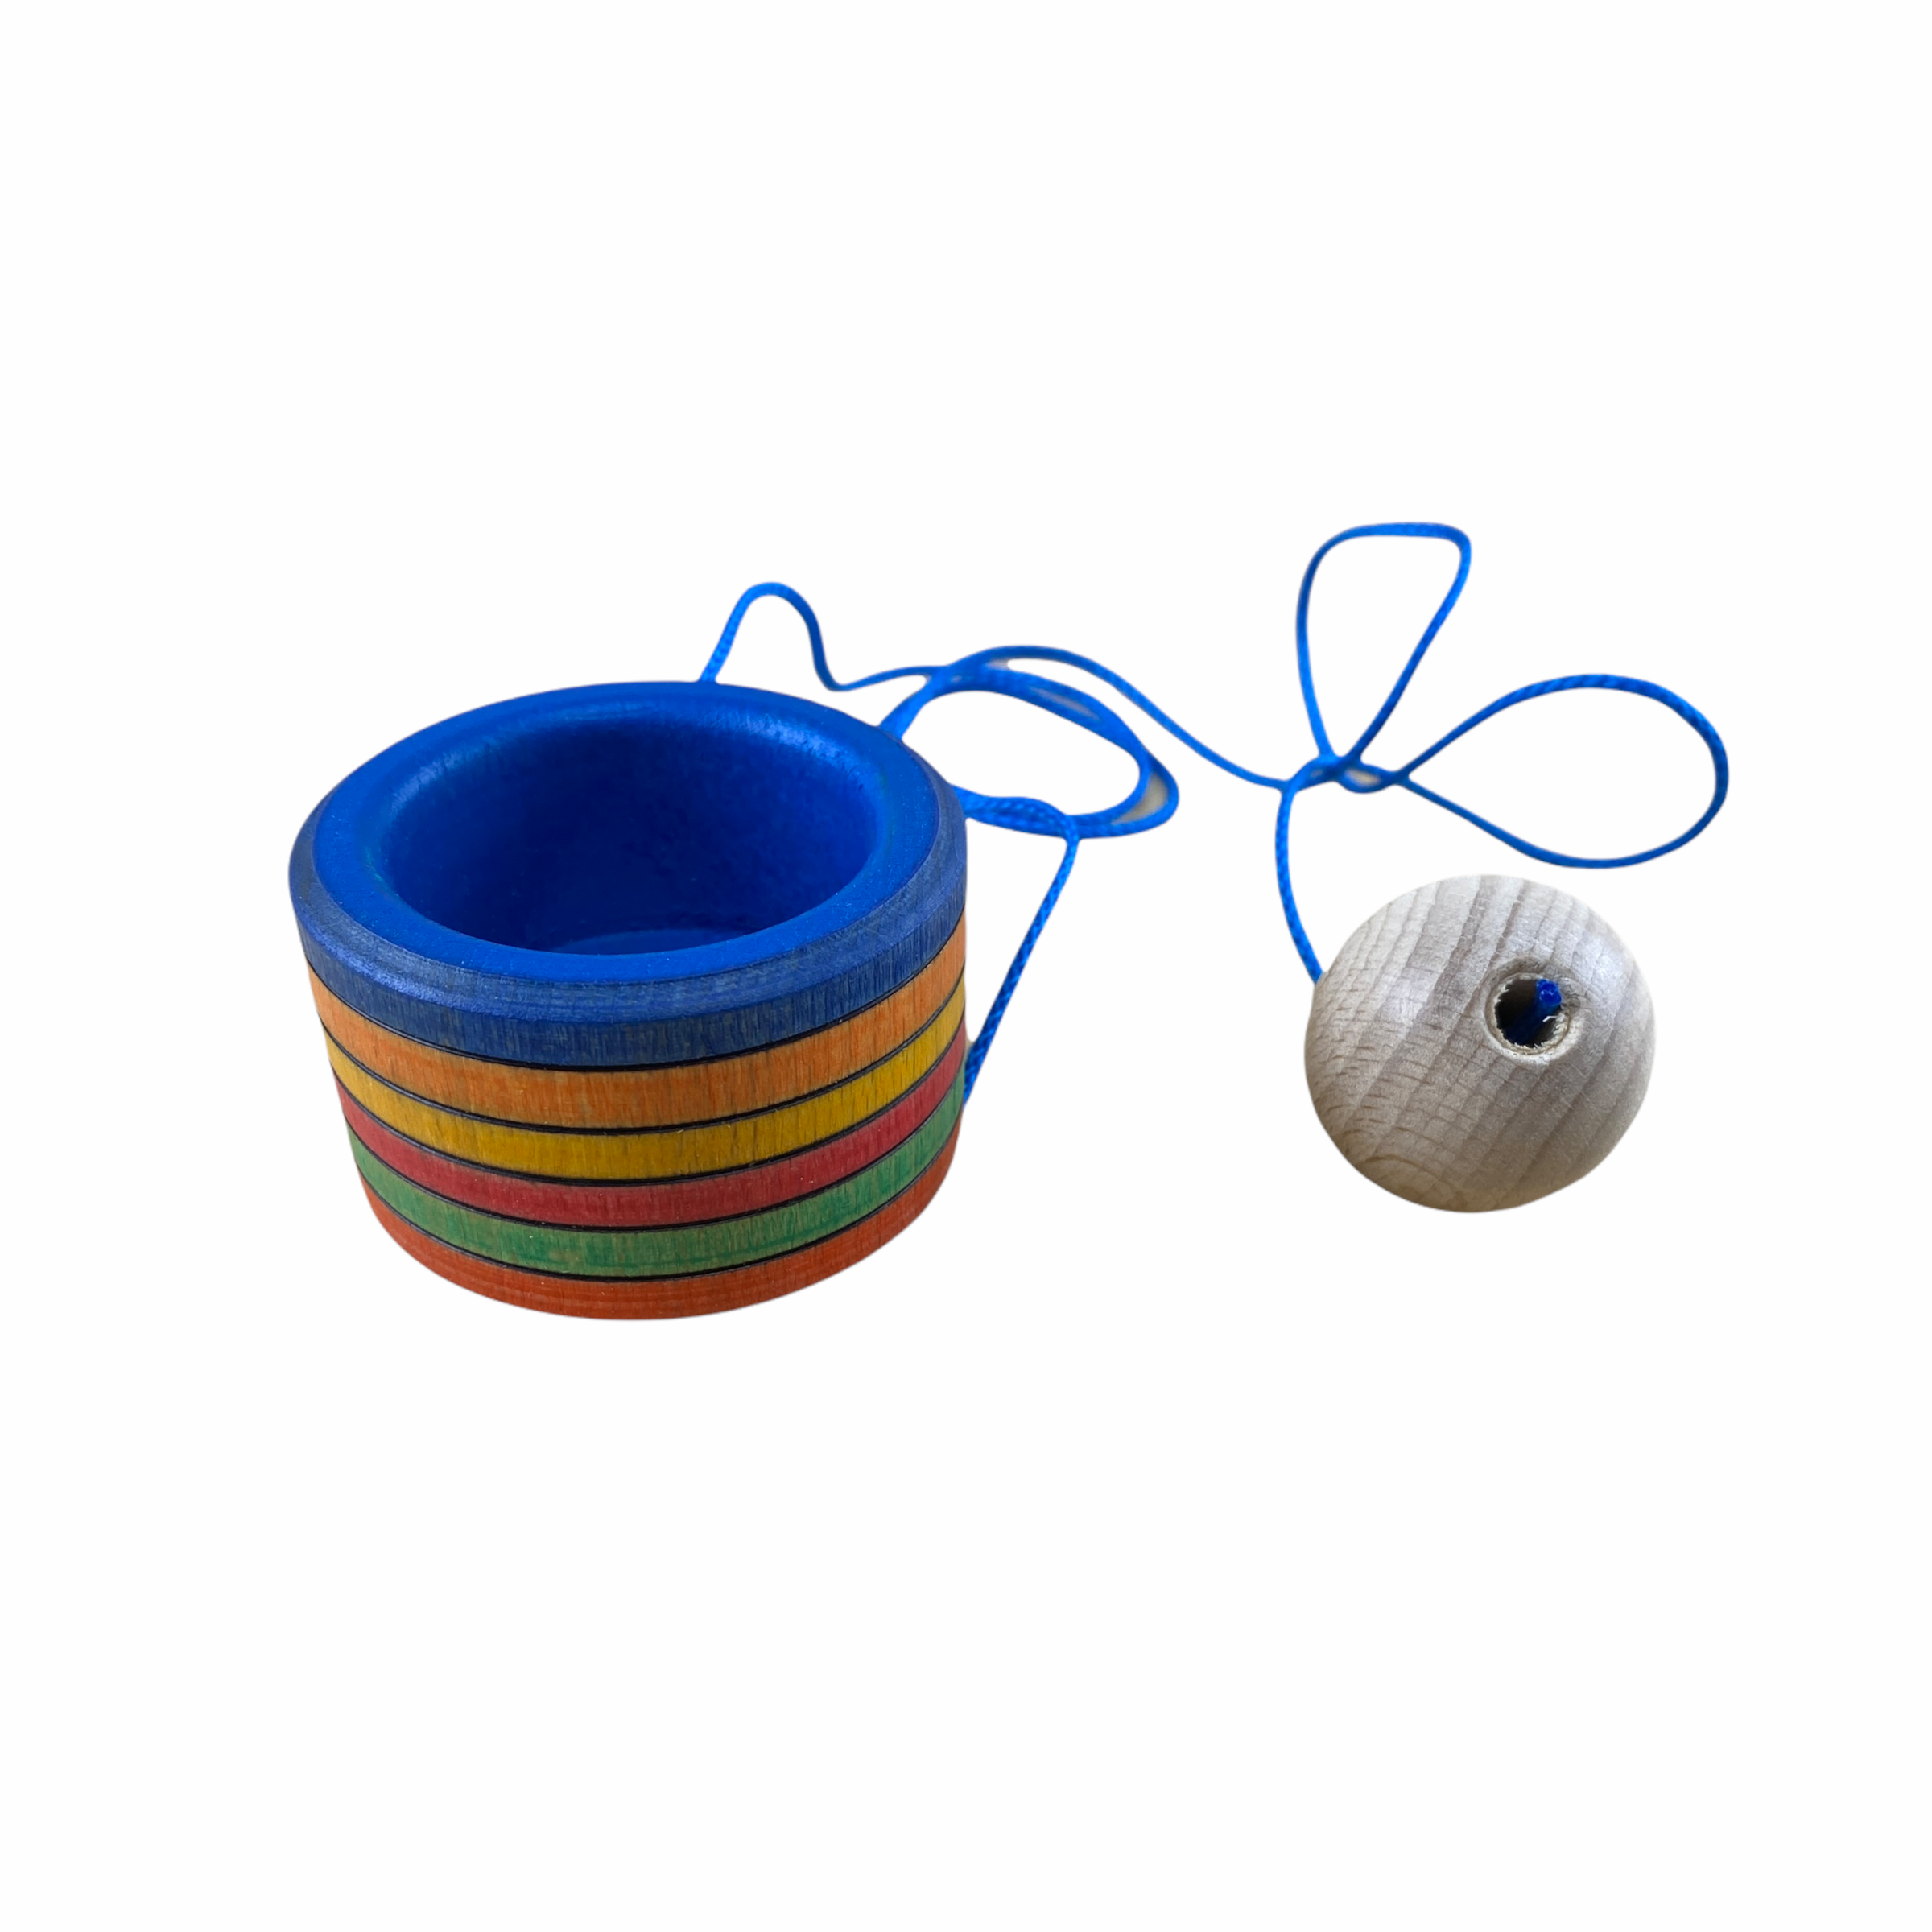 Pocket Bilboquet, Wooden Cup and Ball, Mader - Skill Toys